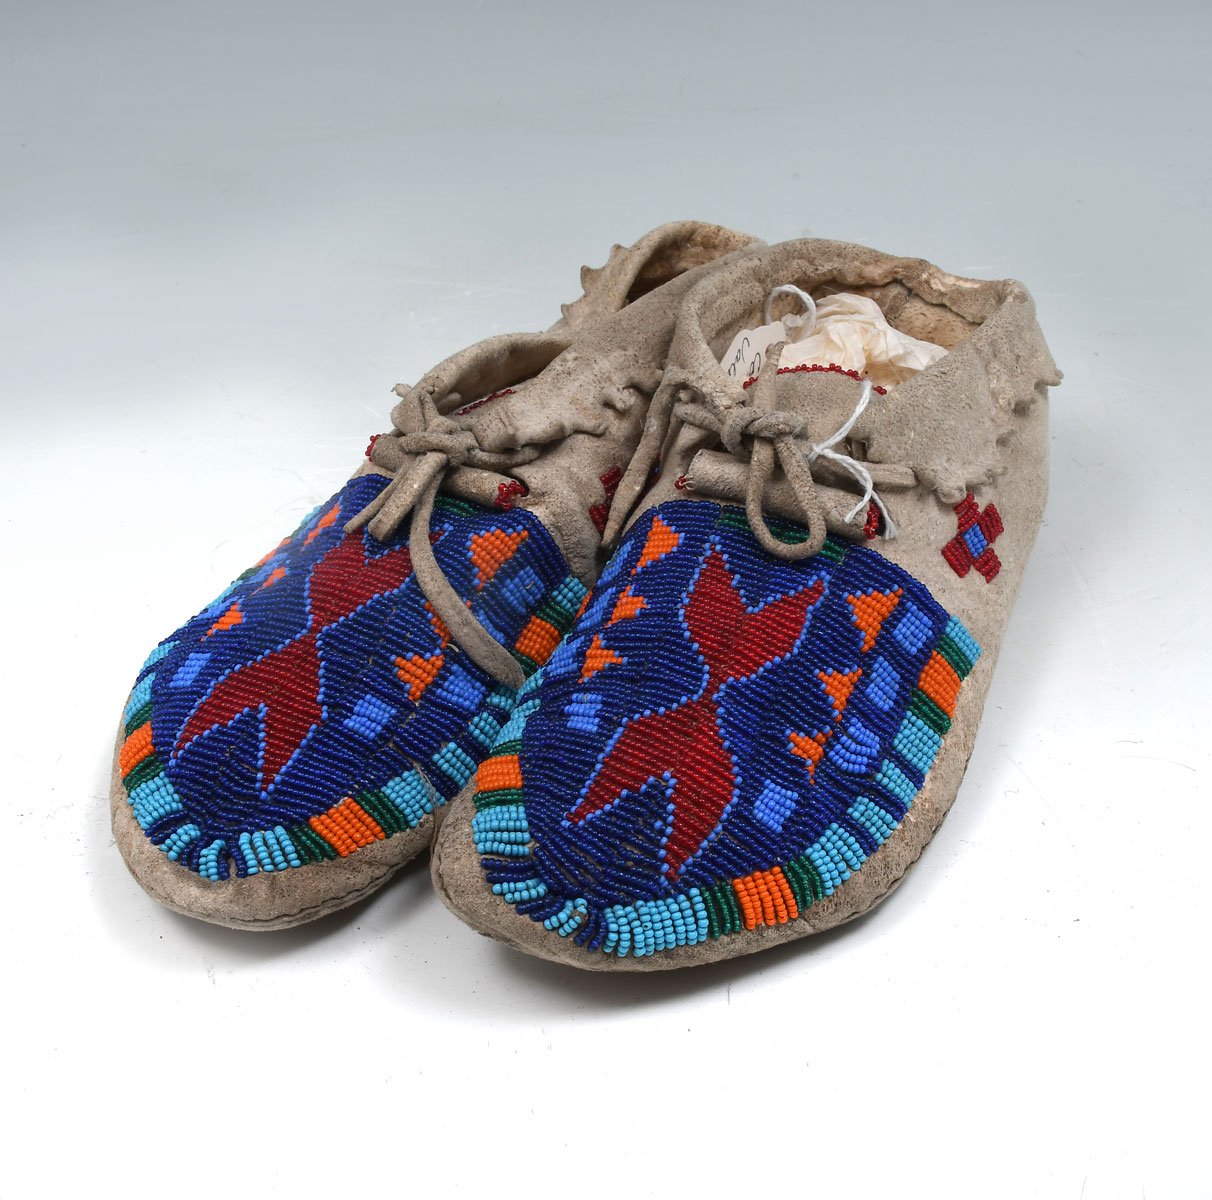 SHOSHONE BEADED MOCCASINS: Traditional